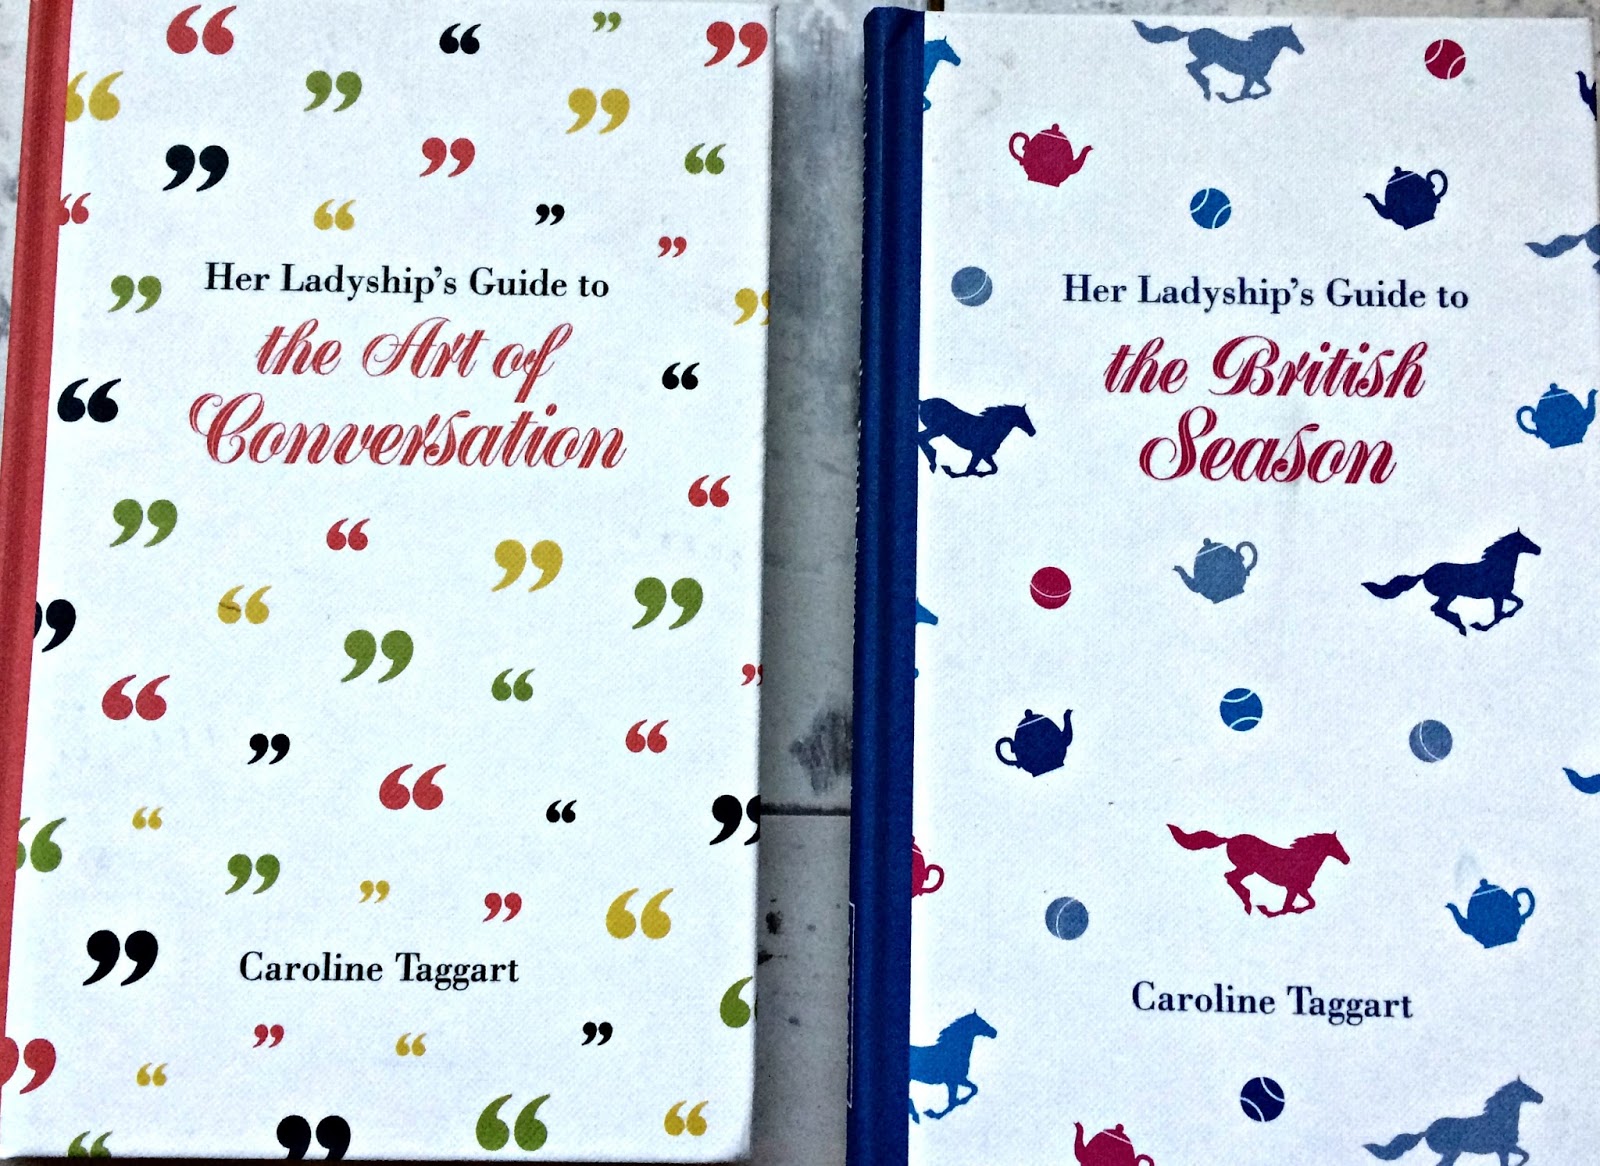 Her Ladyship's Guides:  The Art of Conversation & The British Season